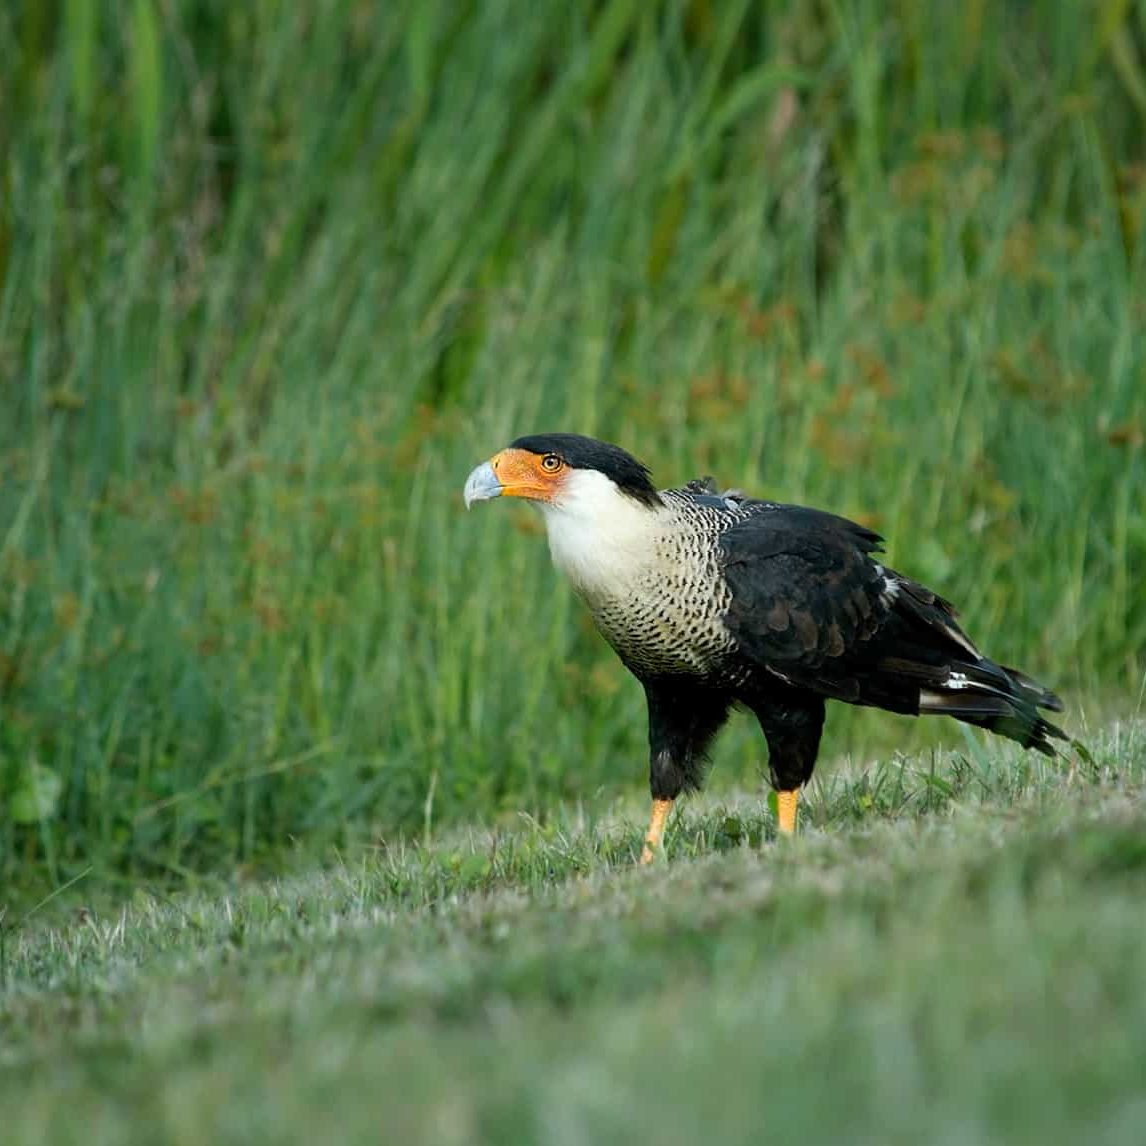 Crested Caracara standing on a grassy hill